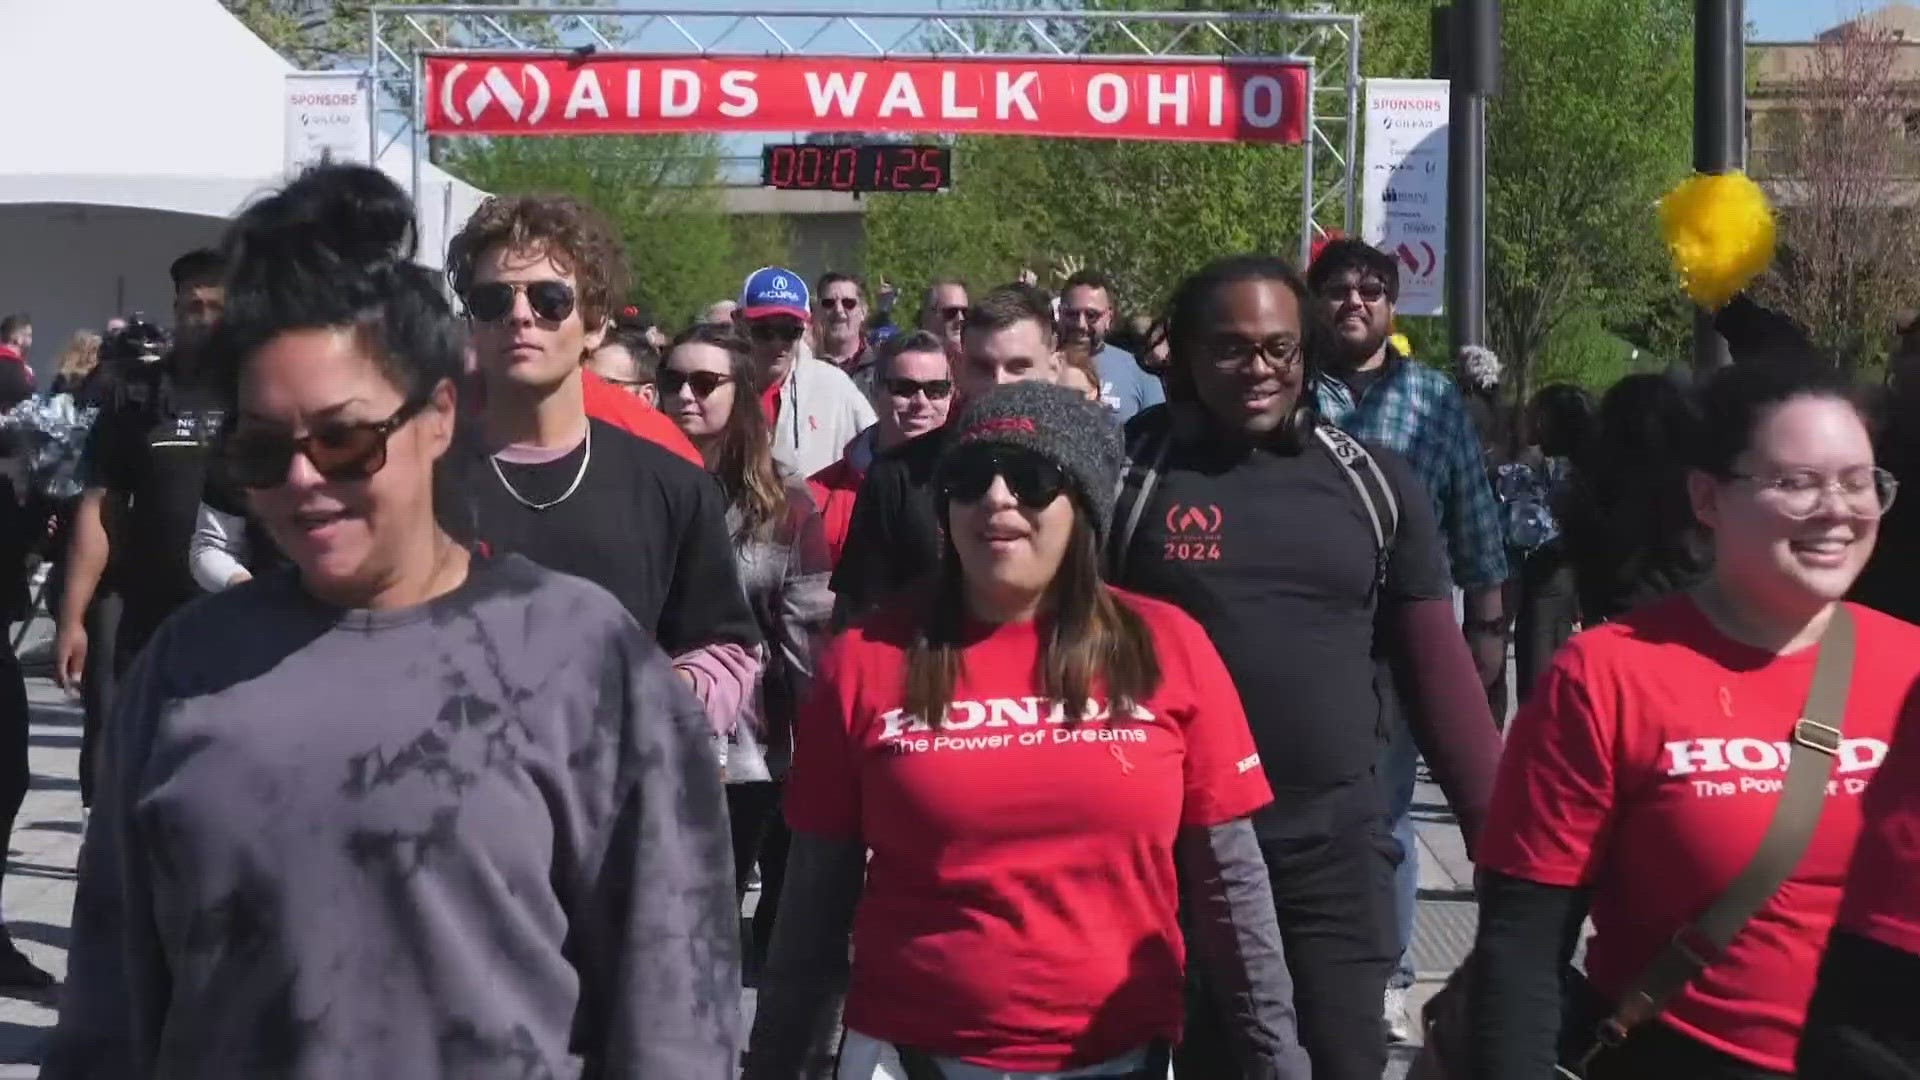 It's one of the biggest events of the year for Equitas Health, and this year, the walk raised nearly $200,000.